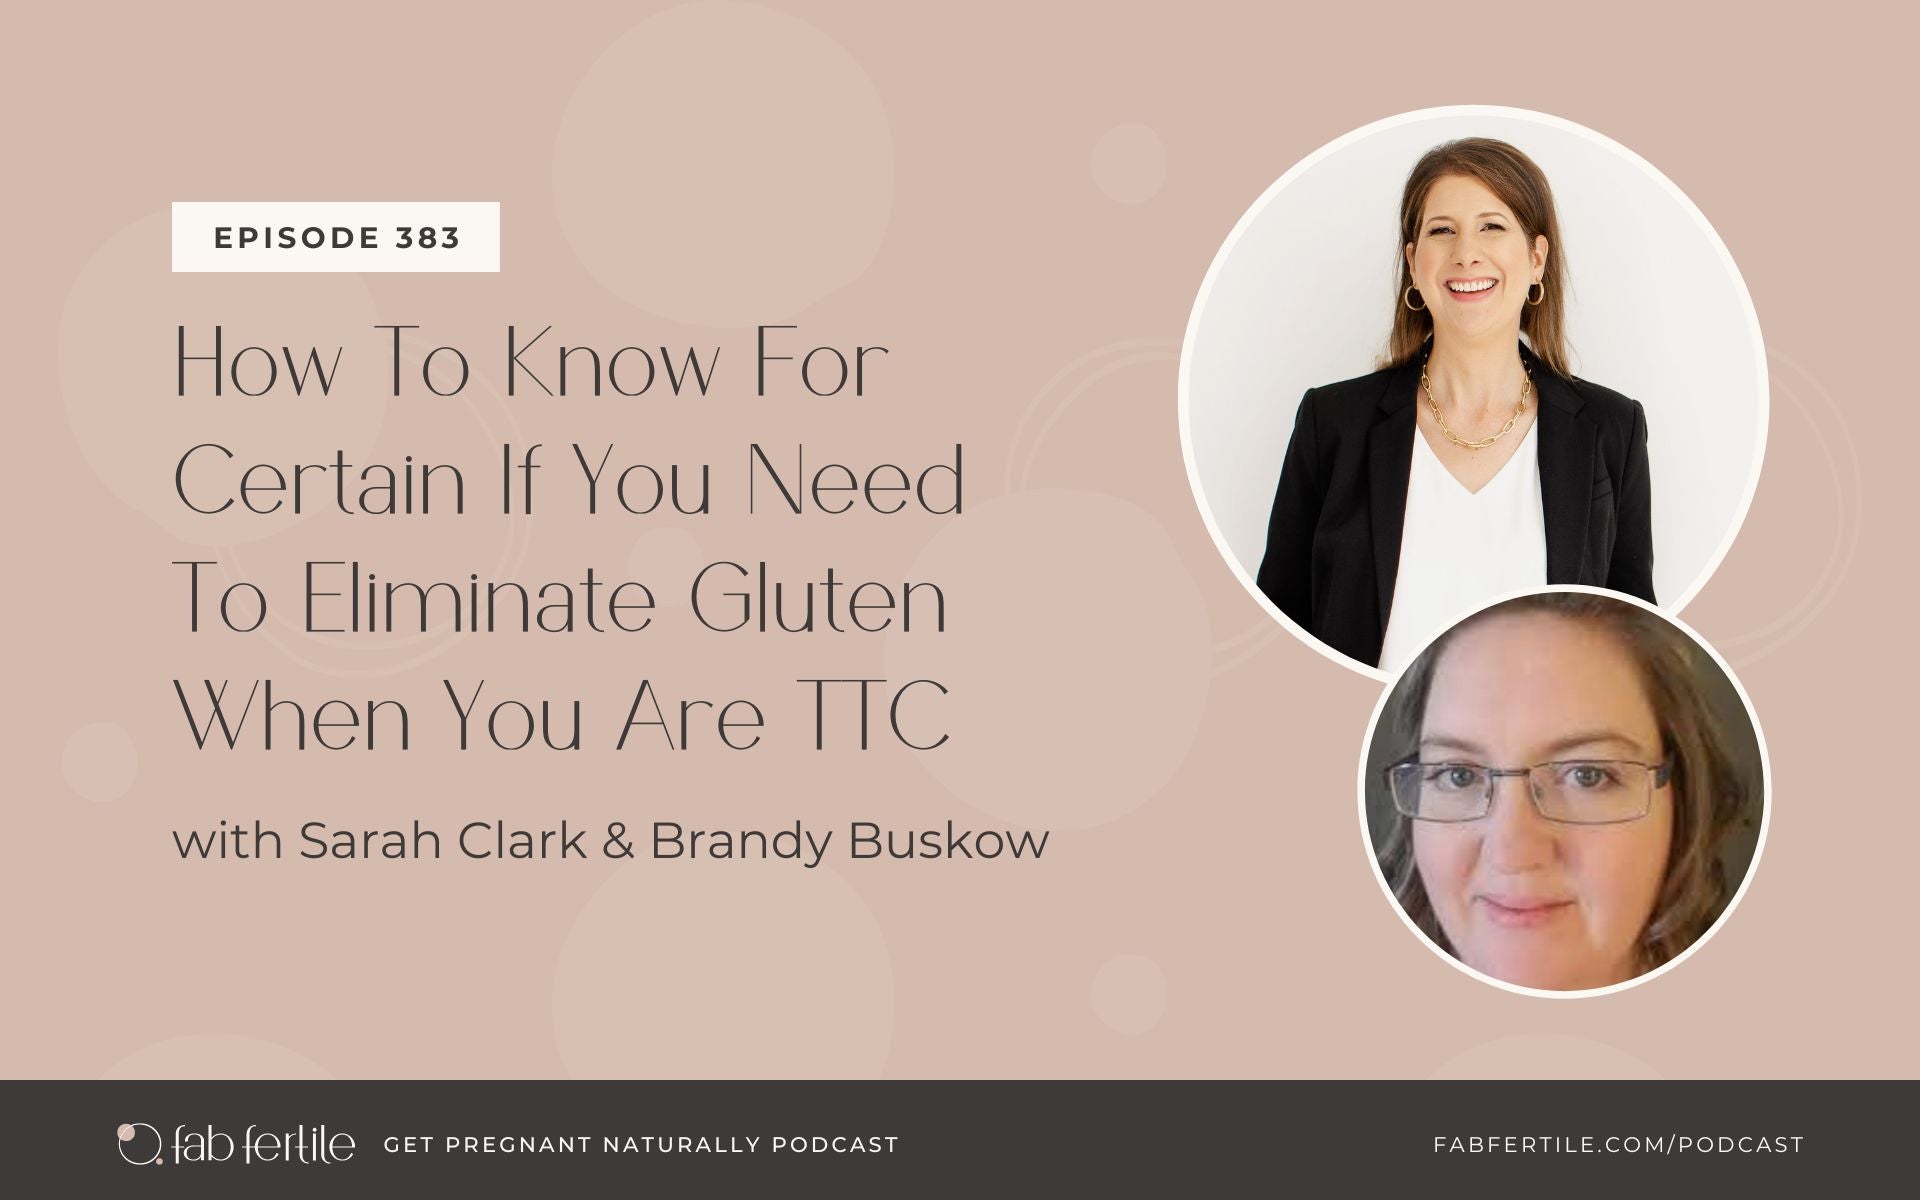 How To Know For Certain If You Need To Eliminate Gluten When You Are TTC